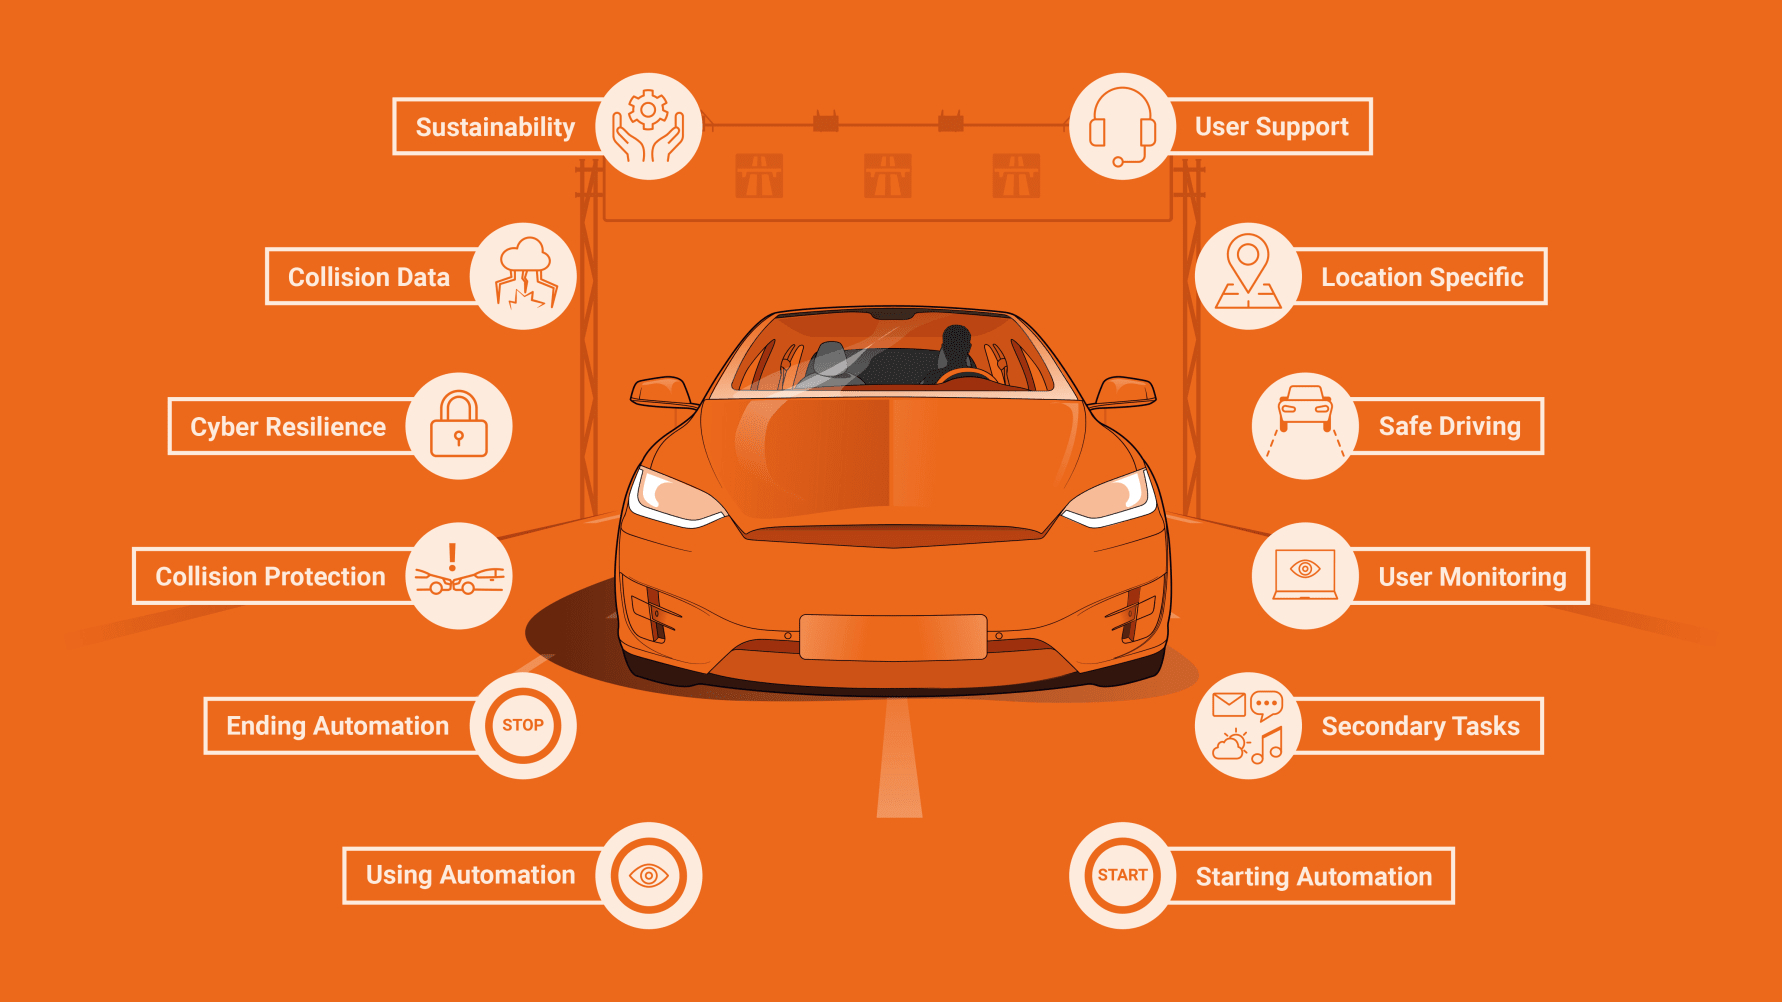 The 12 principles for safe Automated Driving